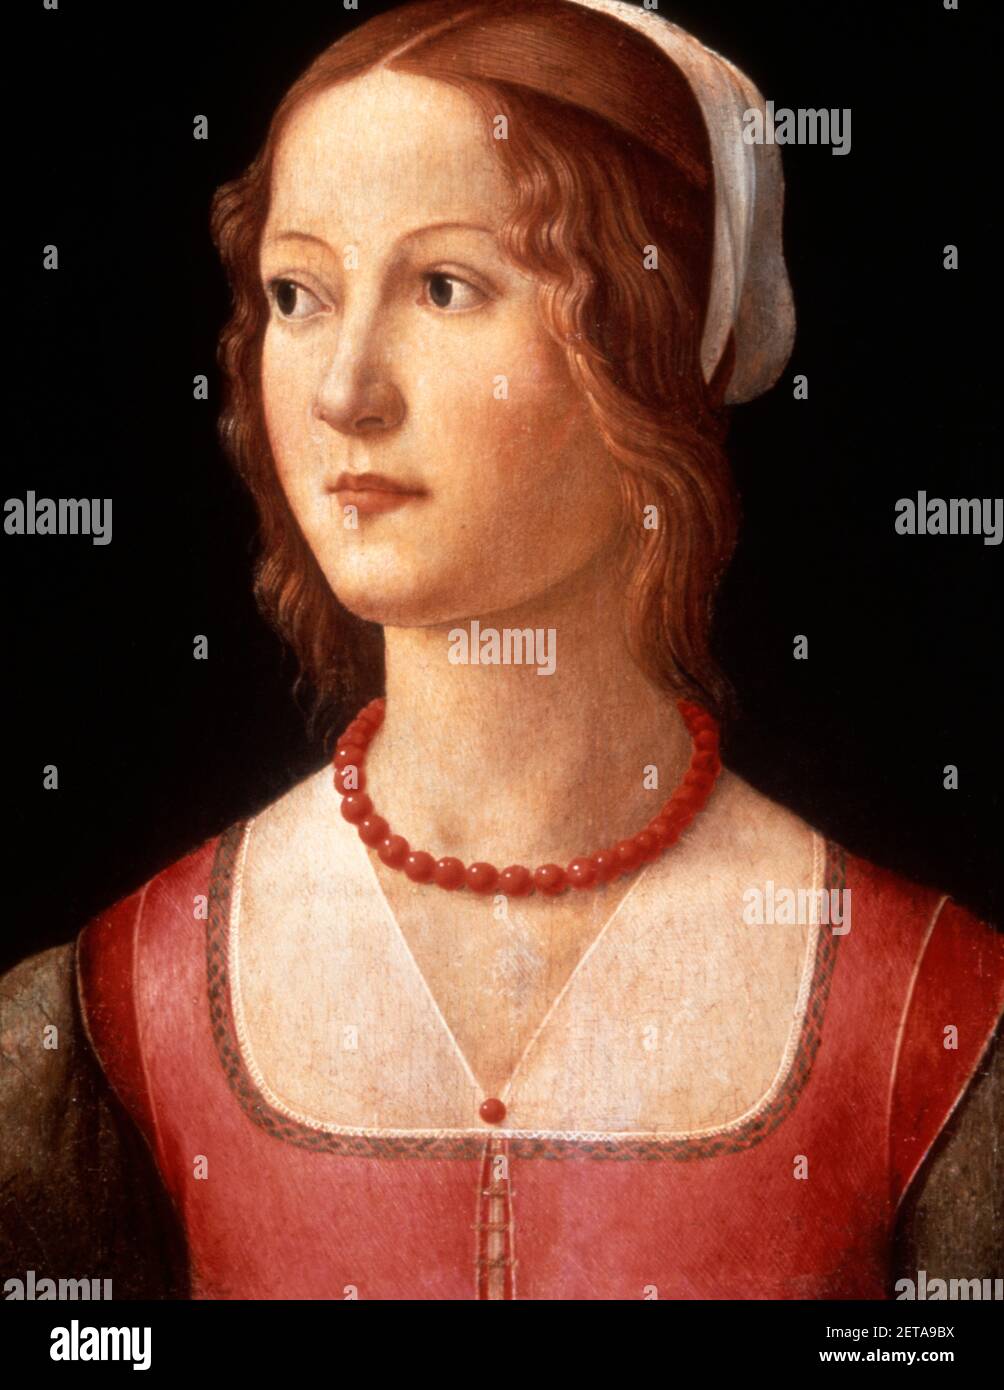 1400s PORTRAIT YOUNG GIRL RED NECKLACE DOMENICO GHIRLANDAIO PAINTING 15th CENTURY CLOTHES GUILBENKIAN MUSEUM LISBON PORTUGAL - ka6851 PHT001 HARS REDHEAD OF RED HAIR 15TH ARTS STYLISH 15TH CENTURY ARTWORK CREATIVITY DOMENICO LISBON PORTUGAL TALENT YOUNG ADULT WOMAN 1400s CAUCASIAN ETHNICITY OLD FASHIONED Stock Photo